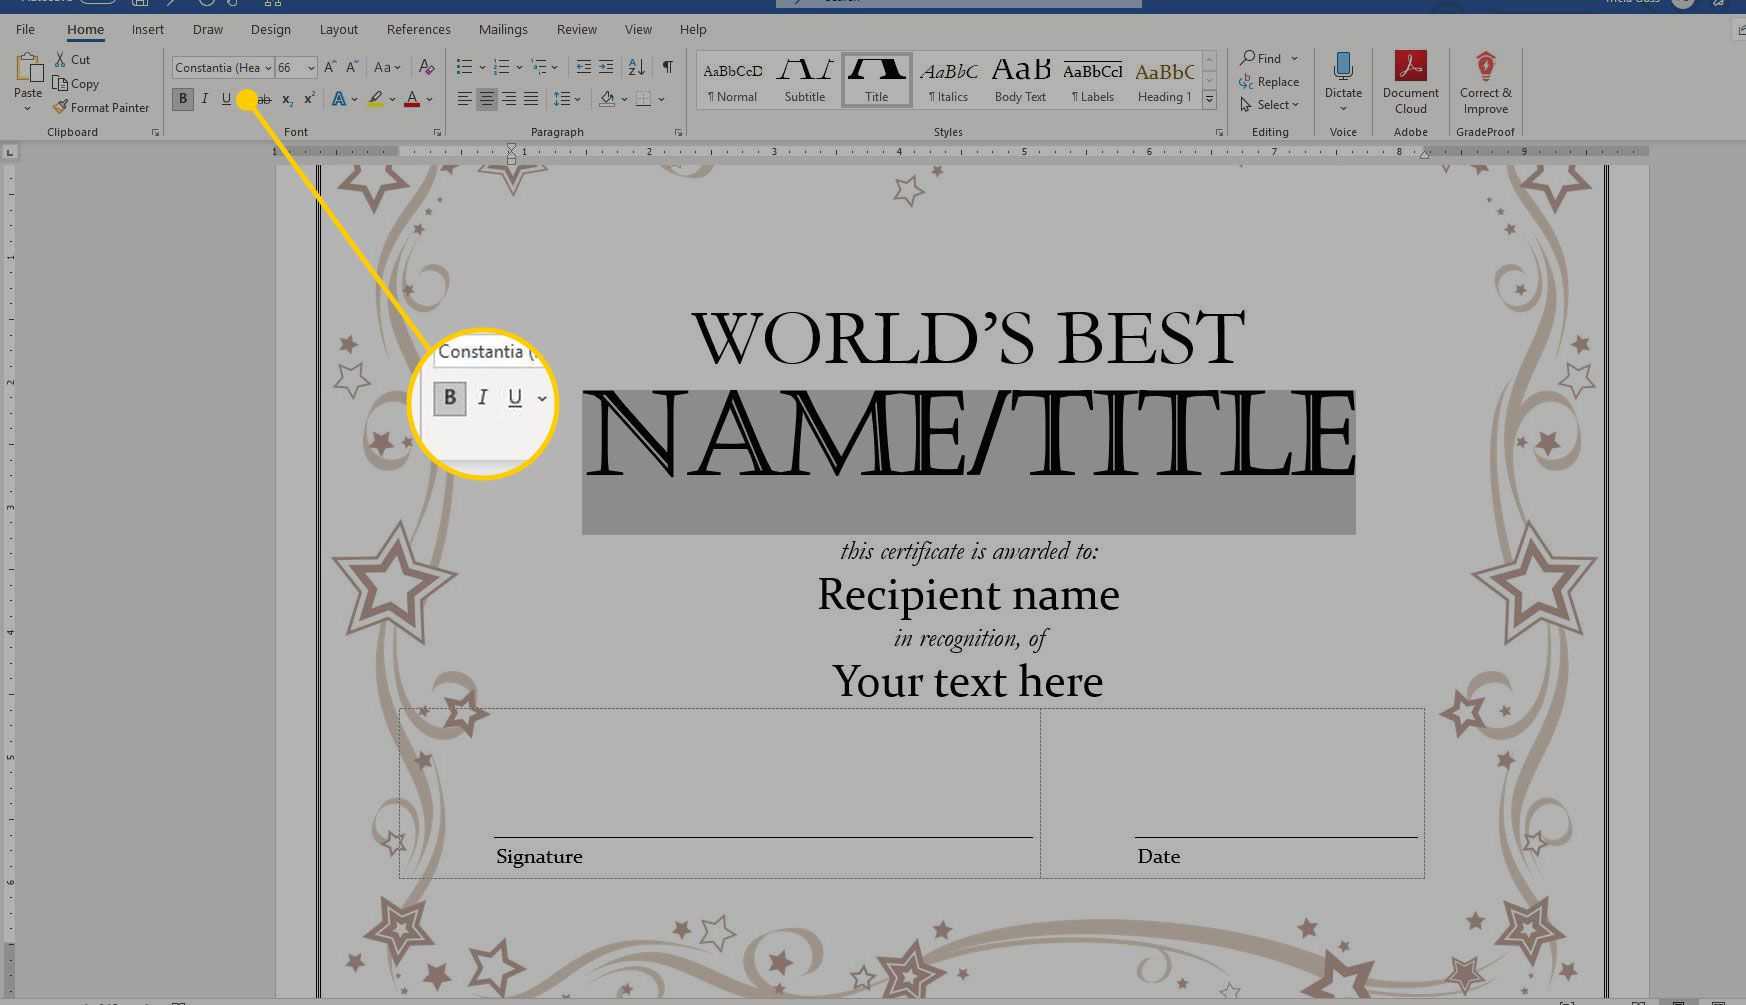 Using A Certificate Template In Microsoft Word Inside This Entitles The Bearer To Template Certificate